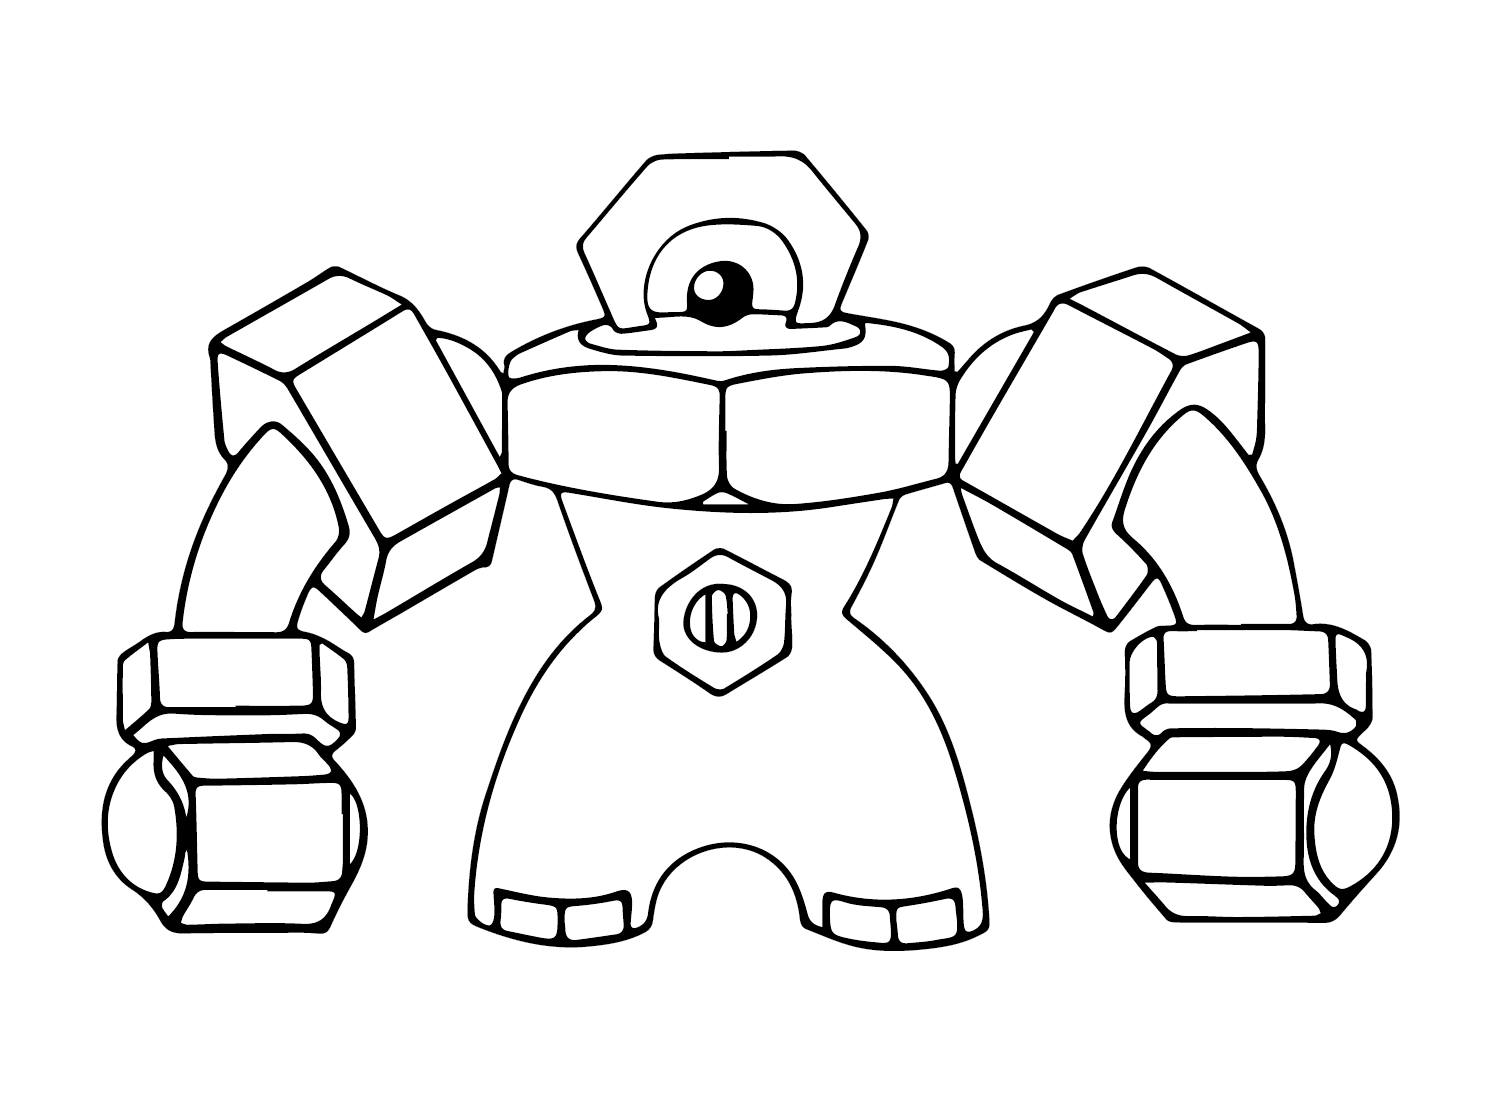 Melmetal Character Coloring Page